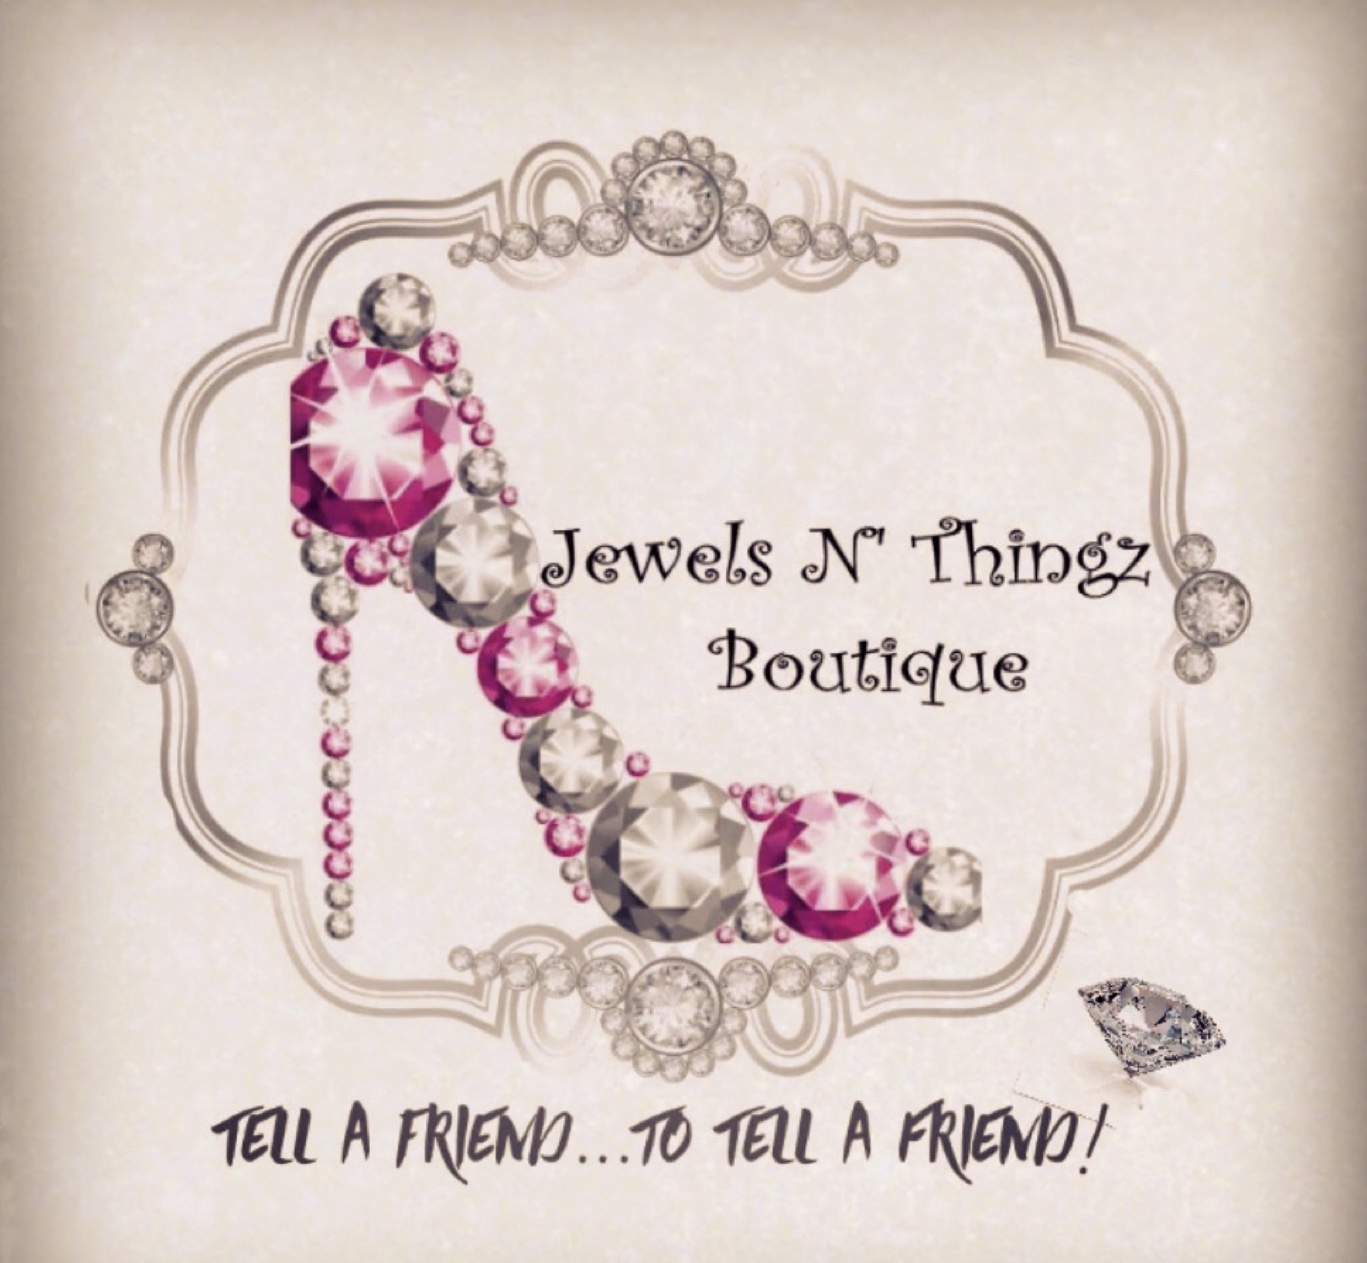 Jewels N Thingz Boutique Profile Picture